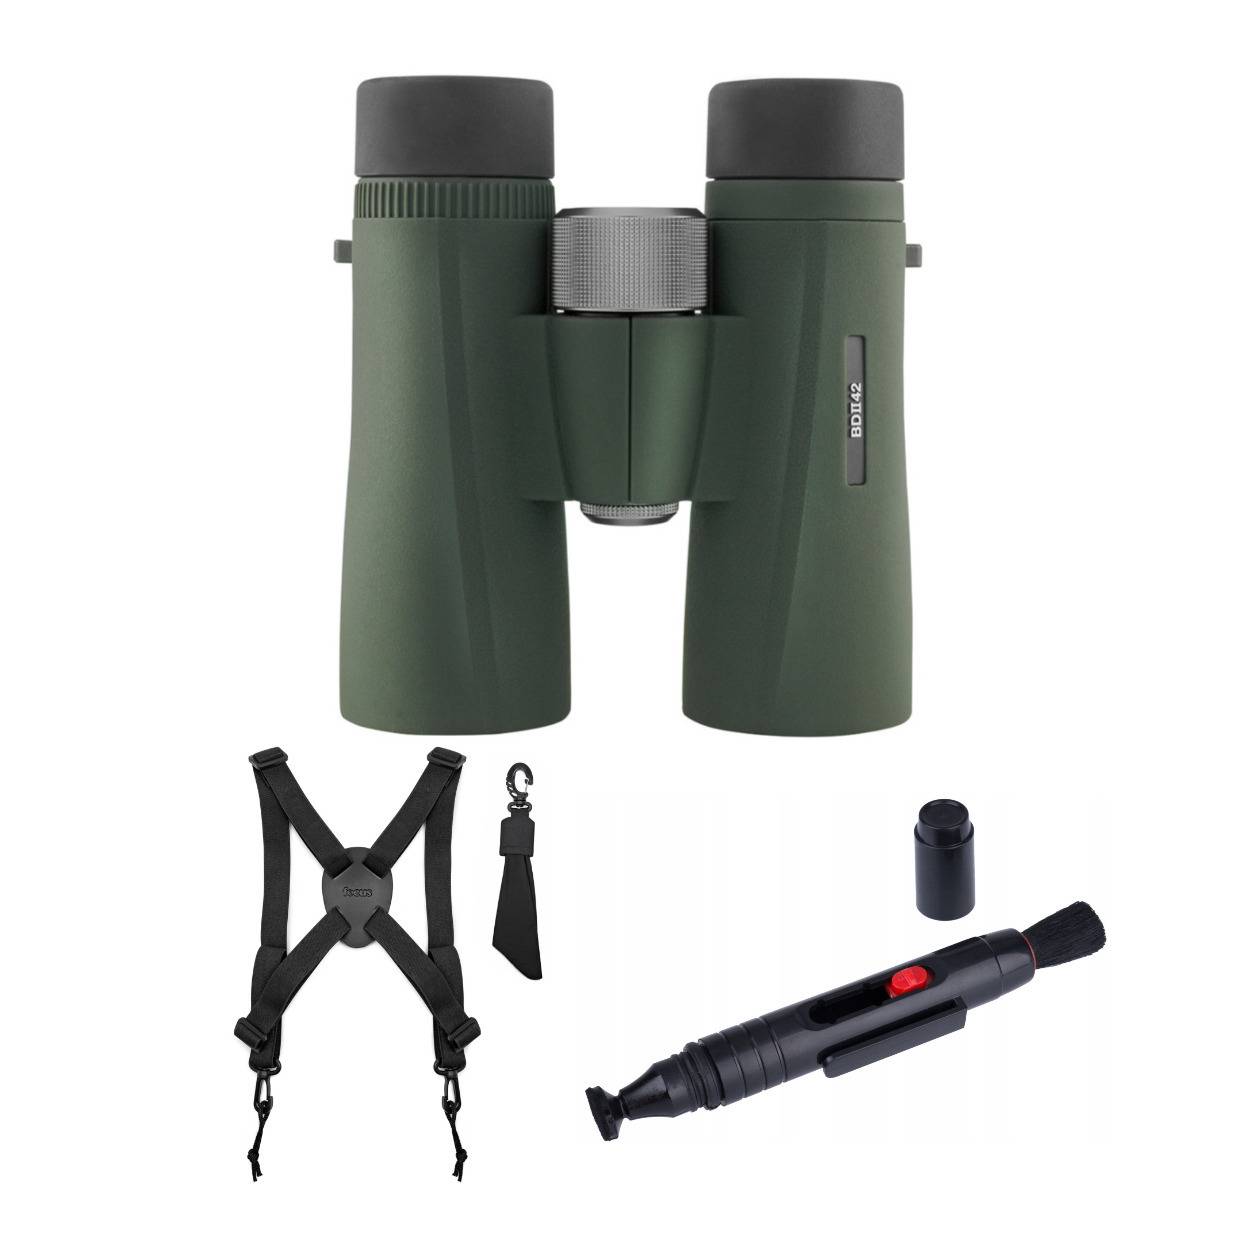 Kowa 10x42 BDII-XD Prominar Roof Prism Binoculars with Harness and Lens Pen